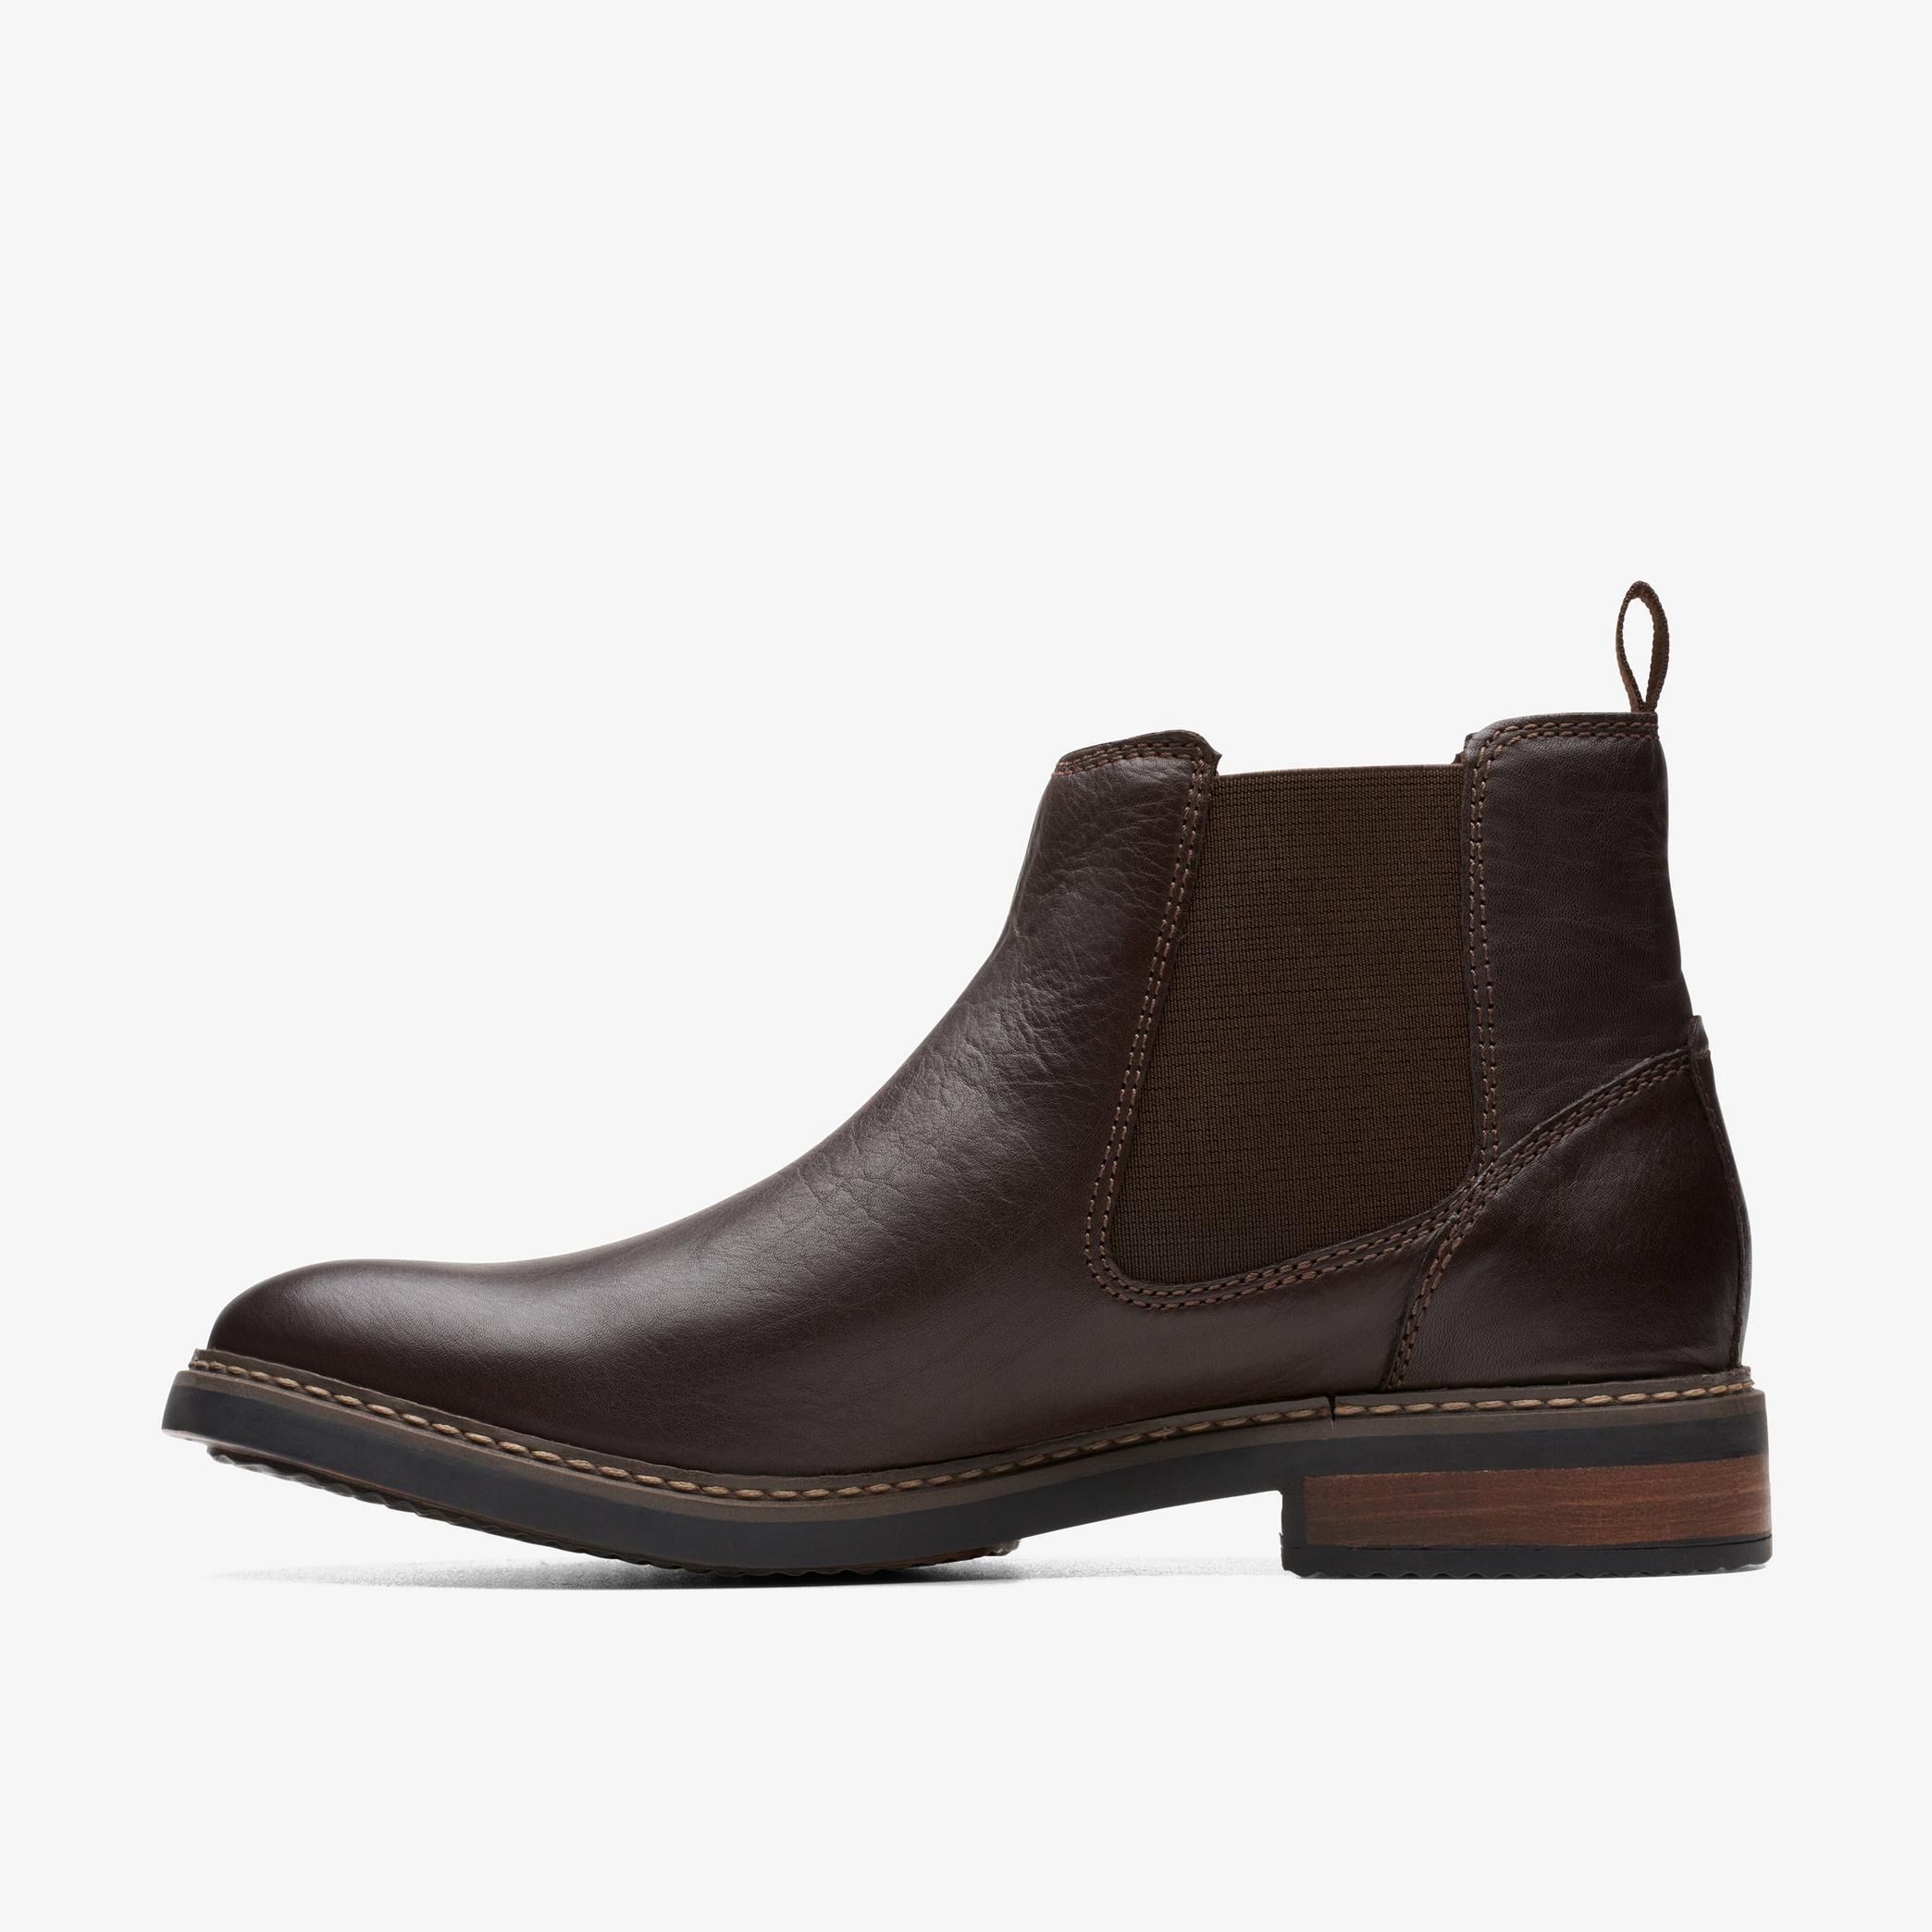 Blackford Top Dark Brown Leather Chelsea Boots, view 2 of 6